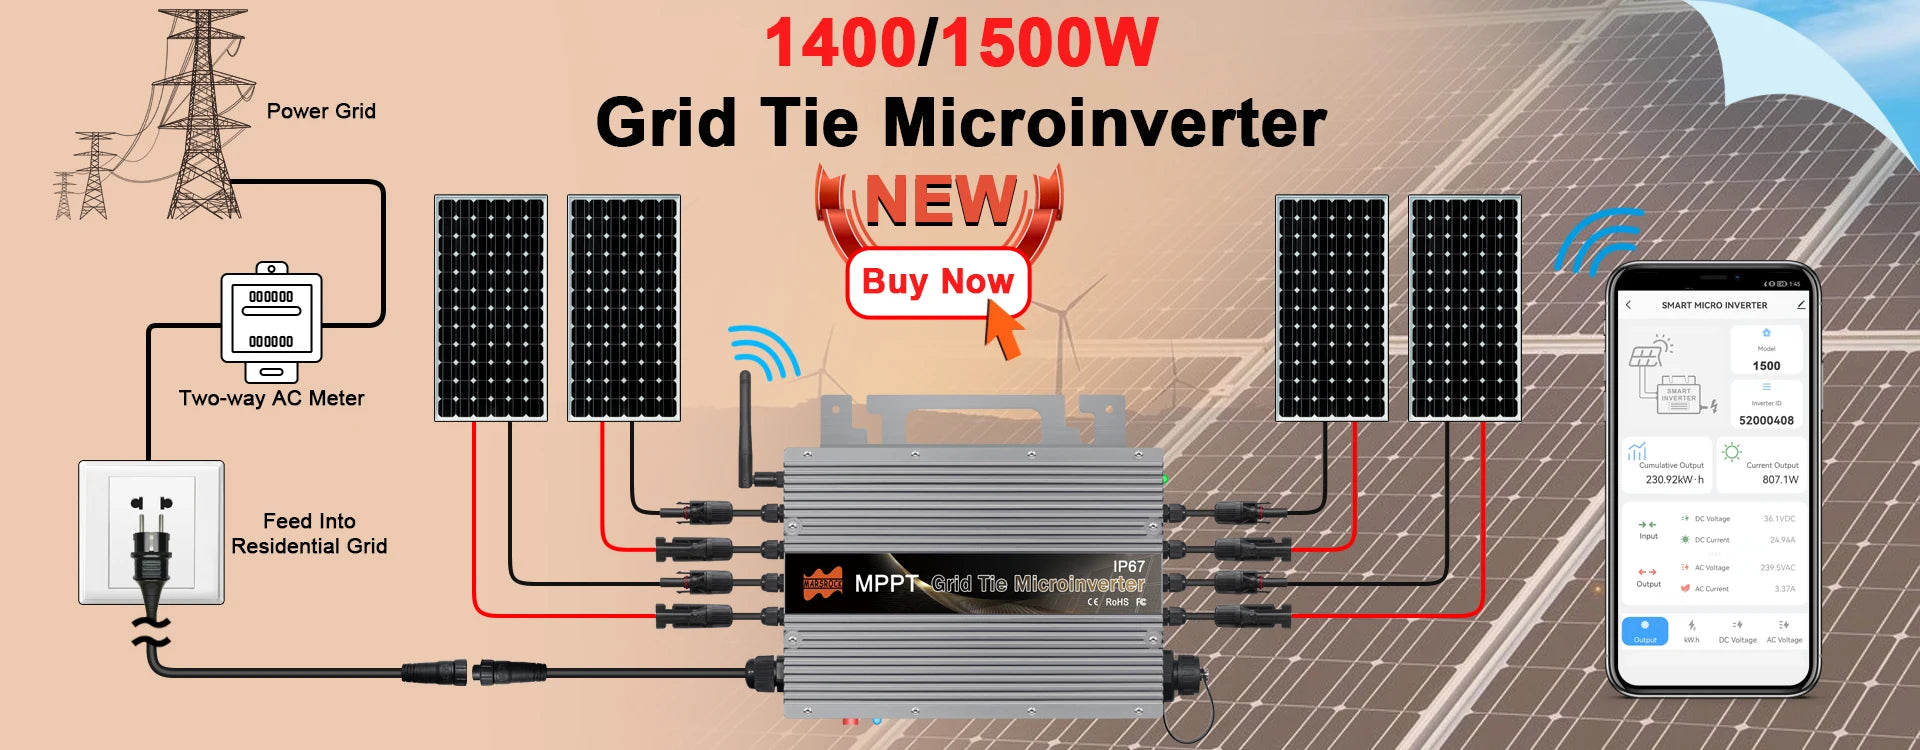 1000W 2000W Solar Inverter, Grid-tied solar inverter with limiter sensor and MPPT tech, suitable for various PV systems, features LCD display.